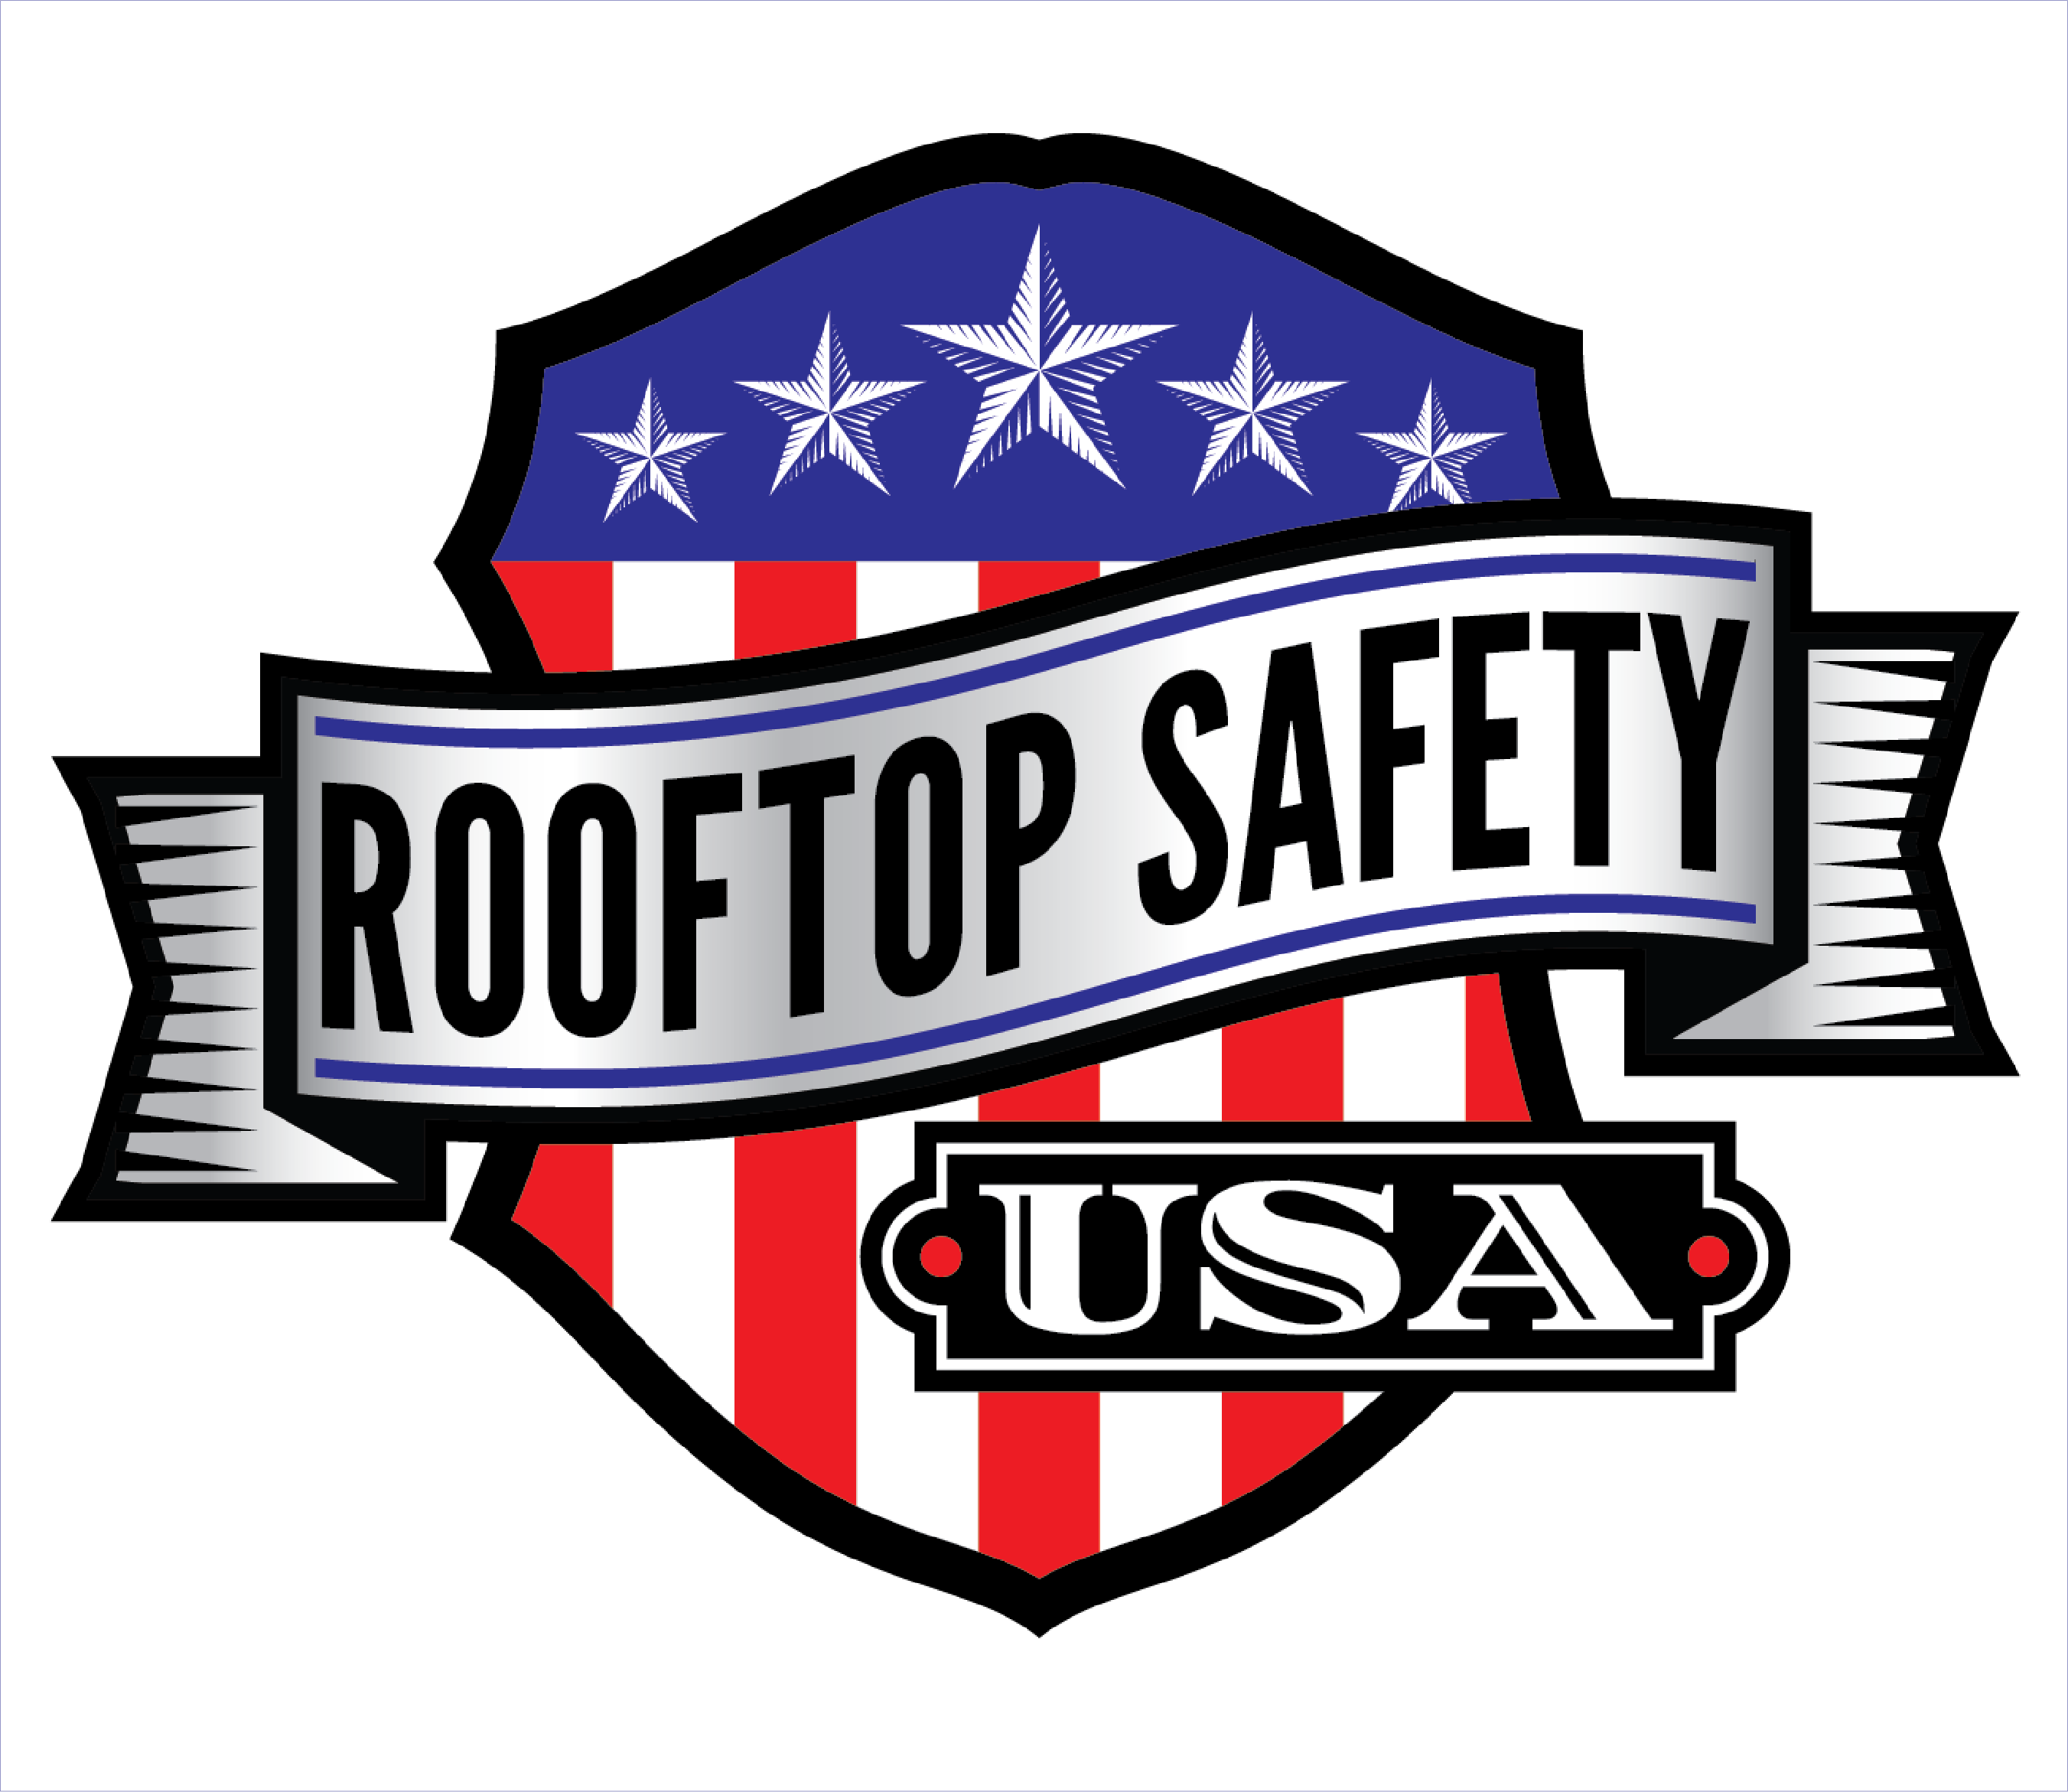 Rooftop Safety